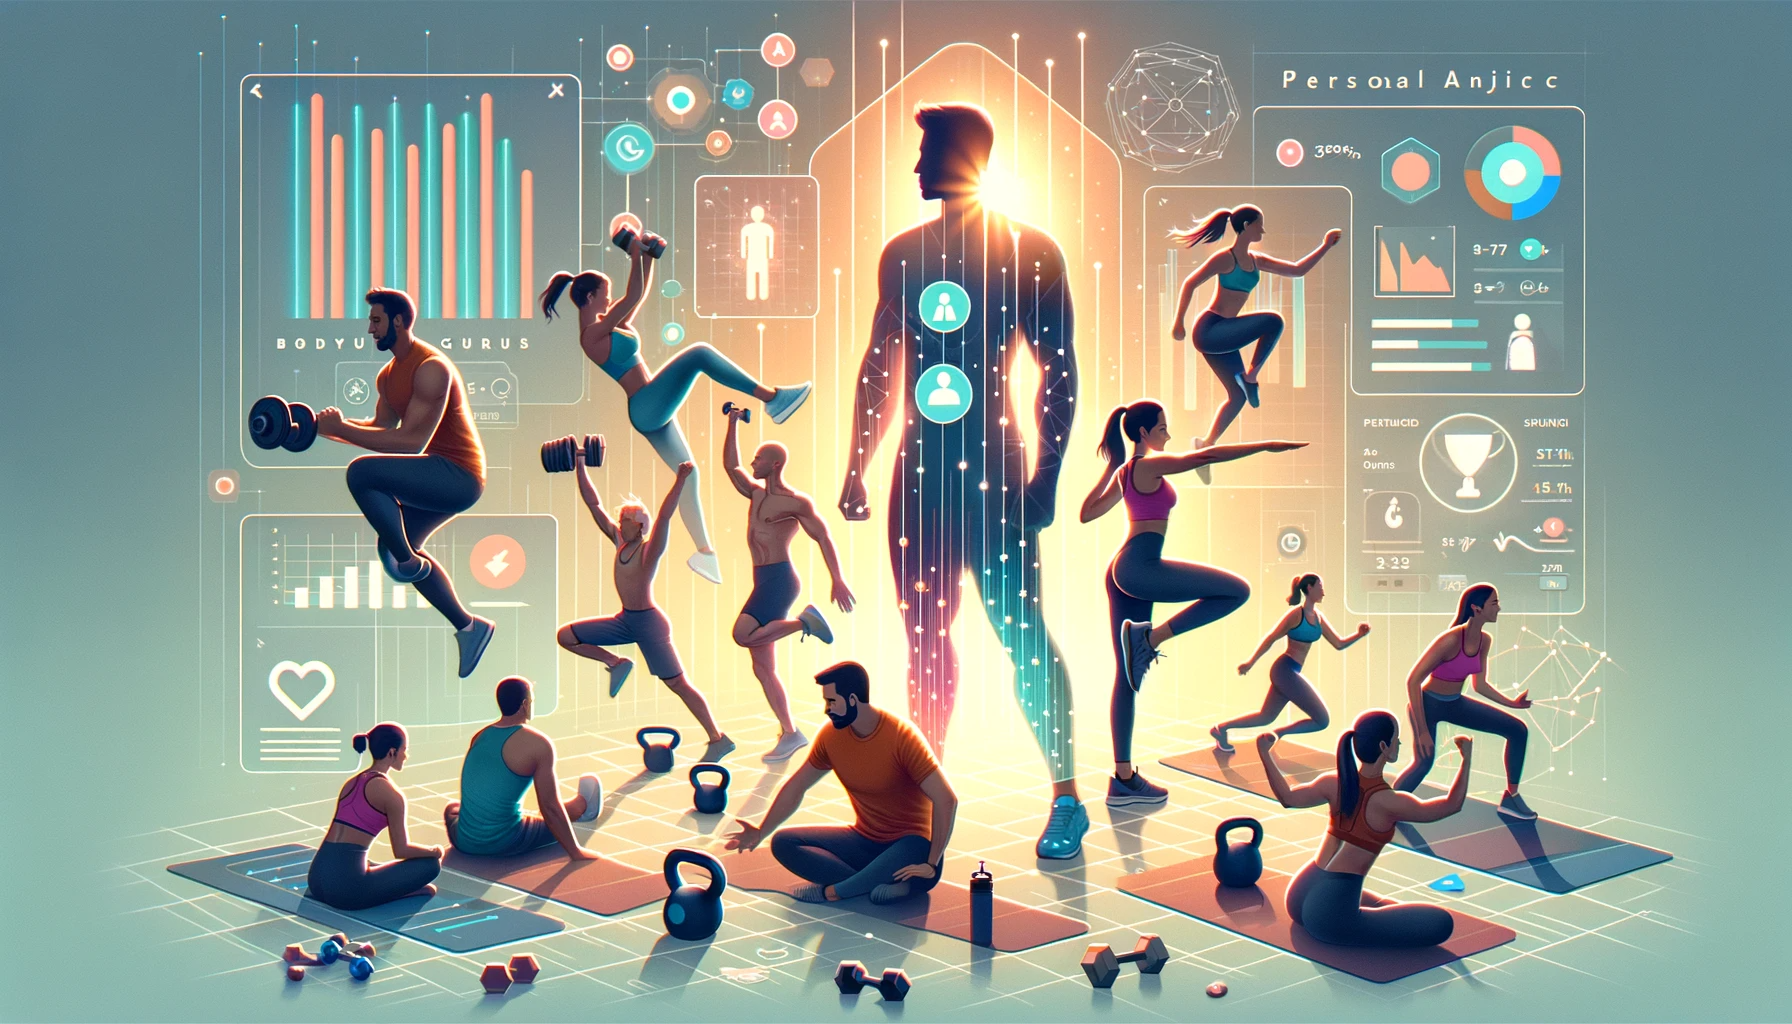 Signup image, group of fit people exercising surrounded by graphics representing analytics and data